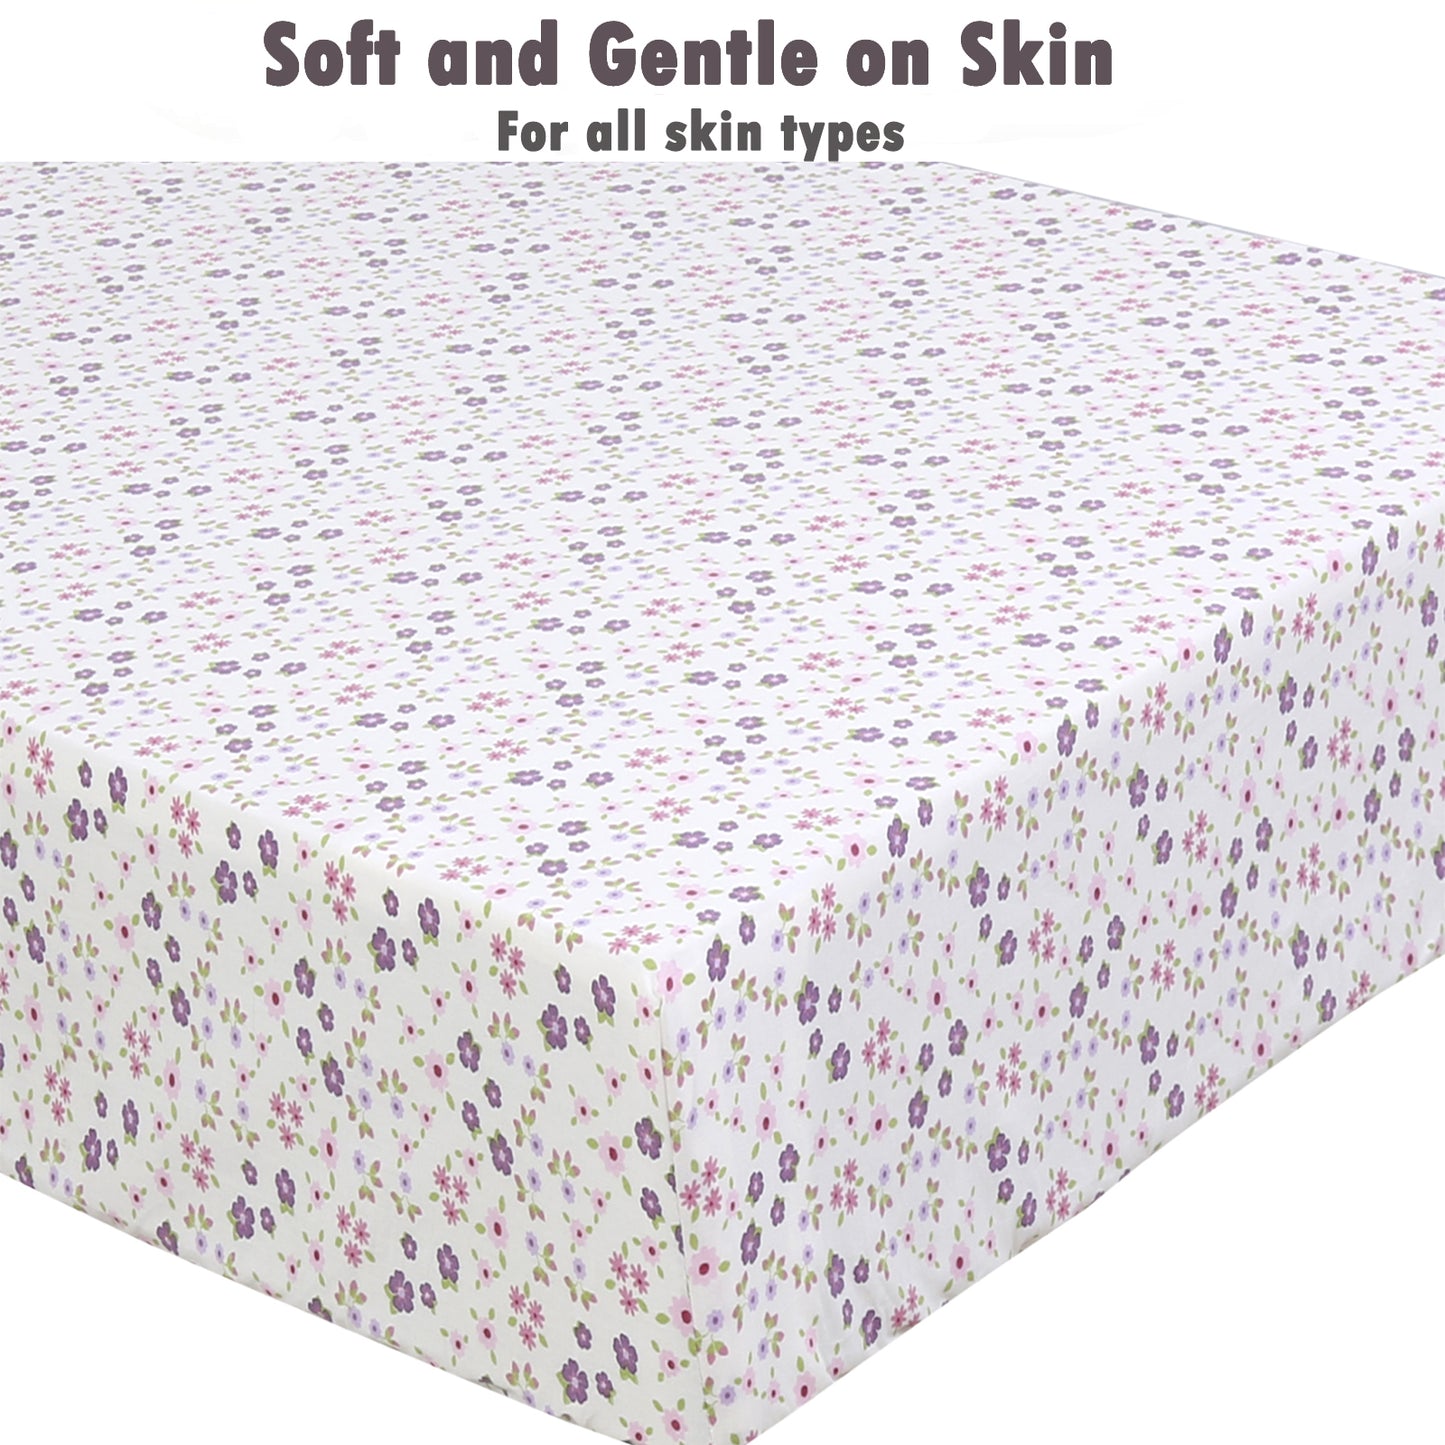 3 Piece Crib/Toddler Cotton Fitted Sheets Pink & Purple Ditsy Floral Red Lady Bug